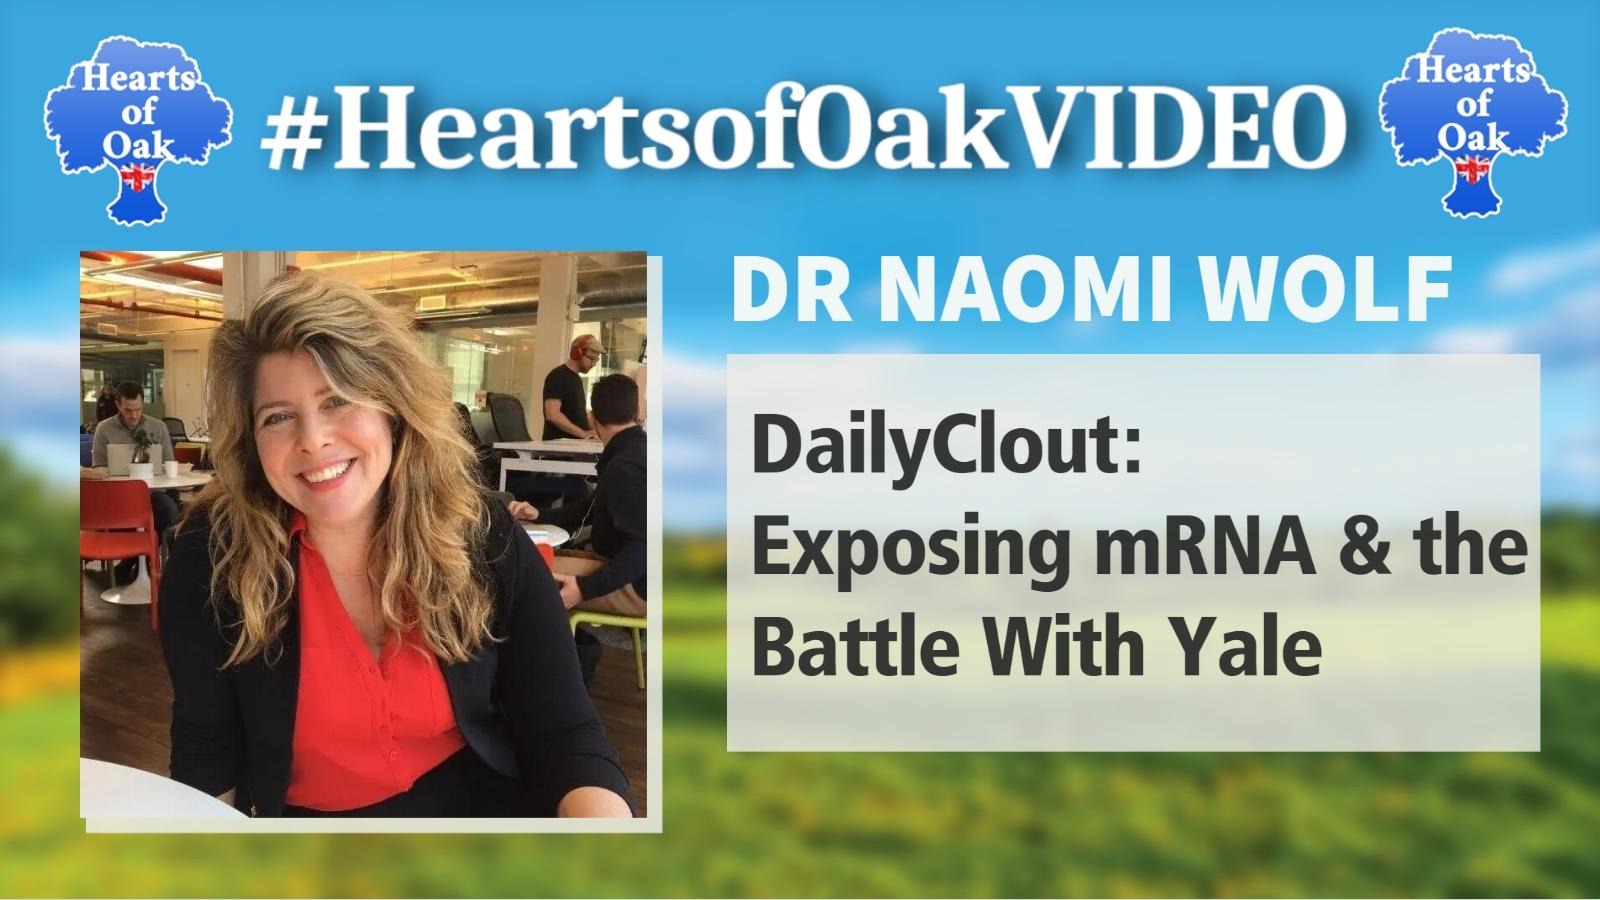 Dr Naomi Wolf - DailyClout: Exposing mRNA & the Battle With Yale